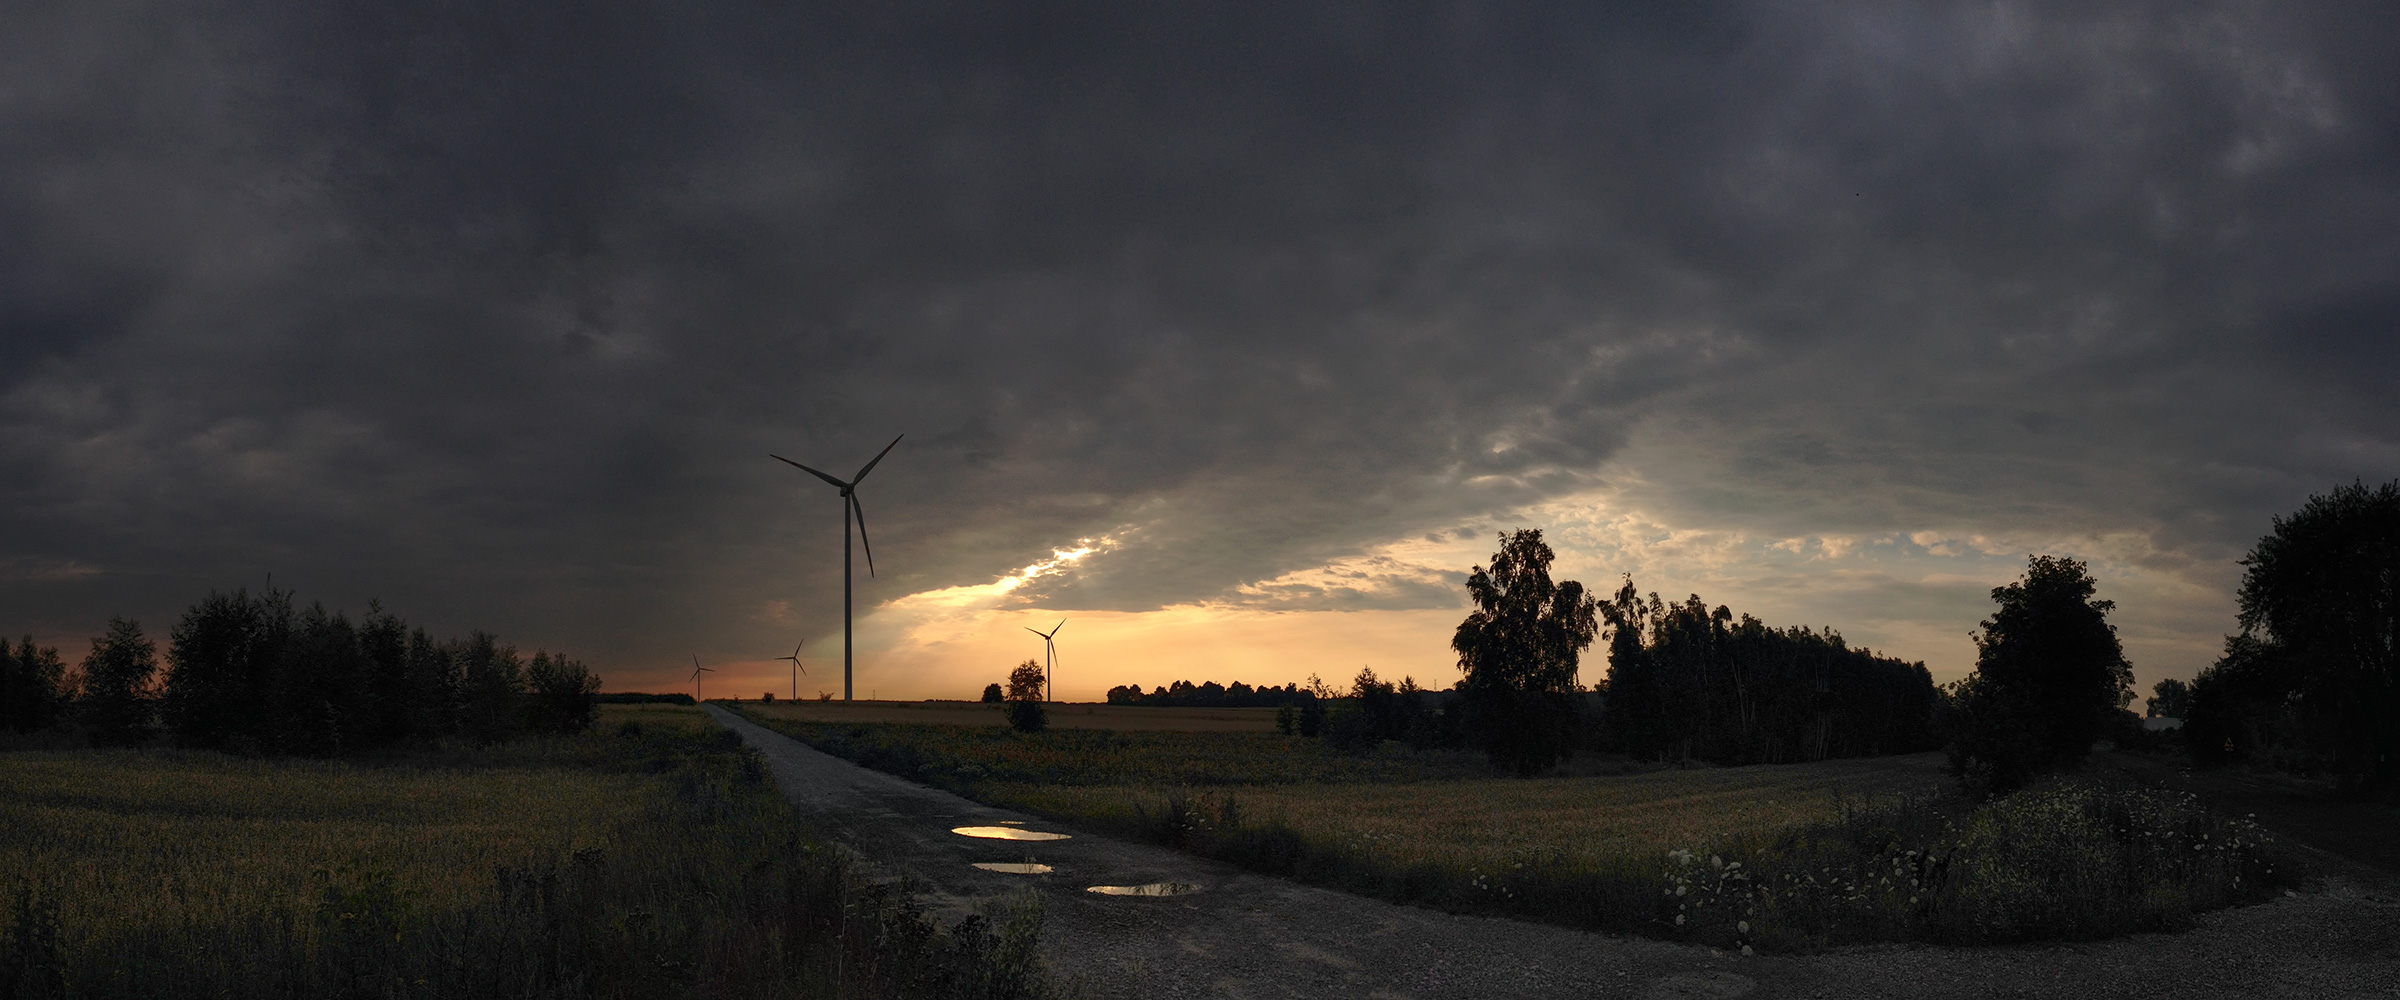 PANORAMA DIARY | Iphoneography blog | Wind turbines in Poland